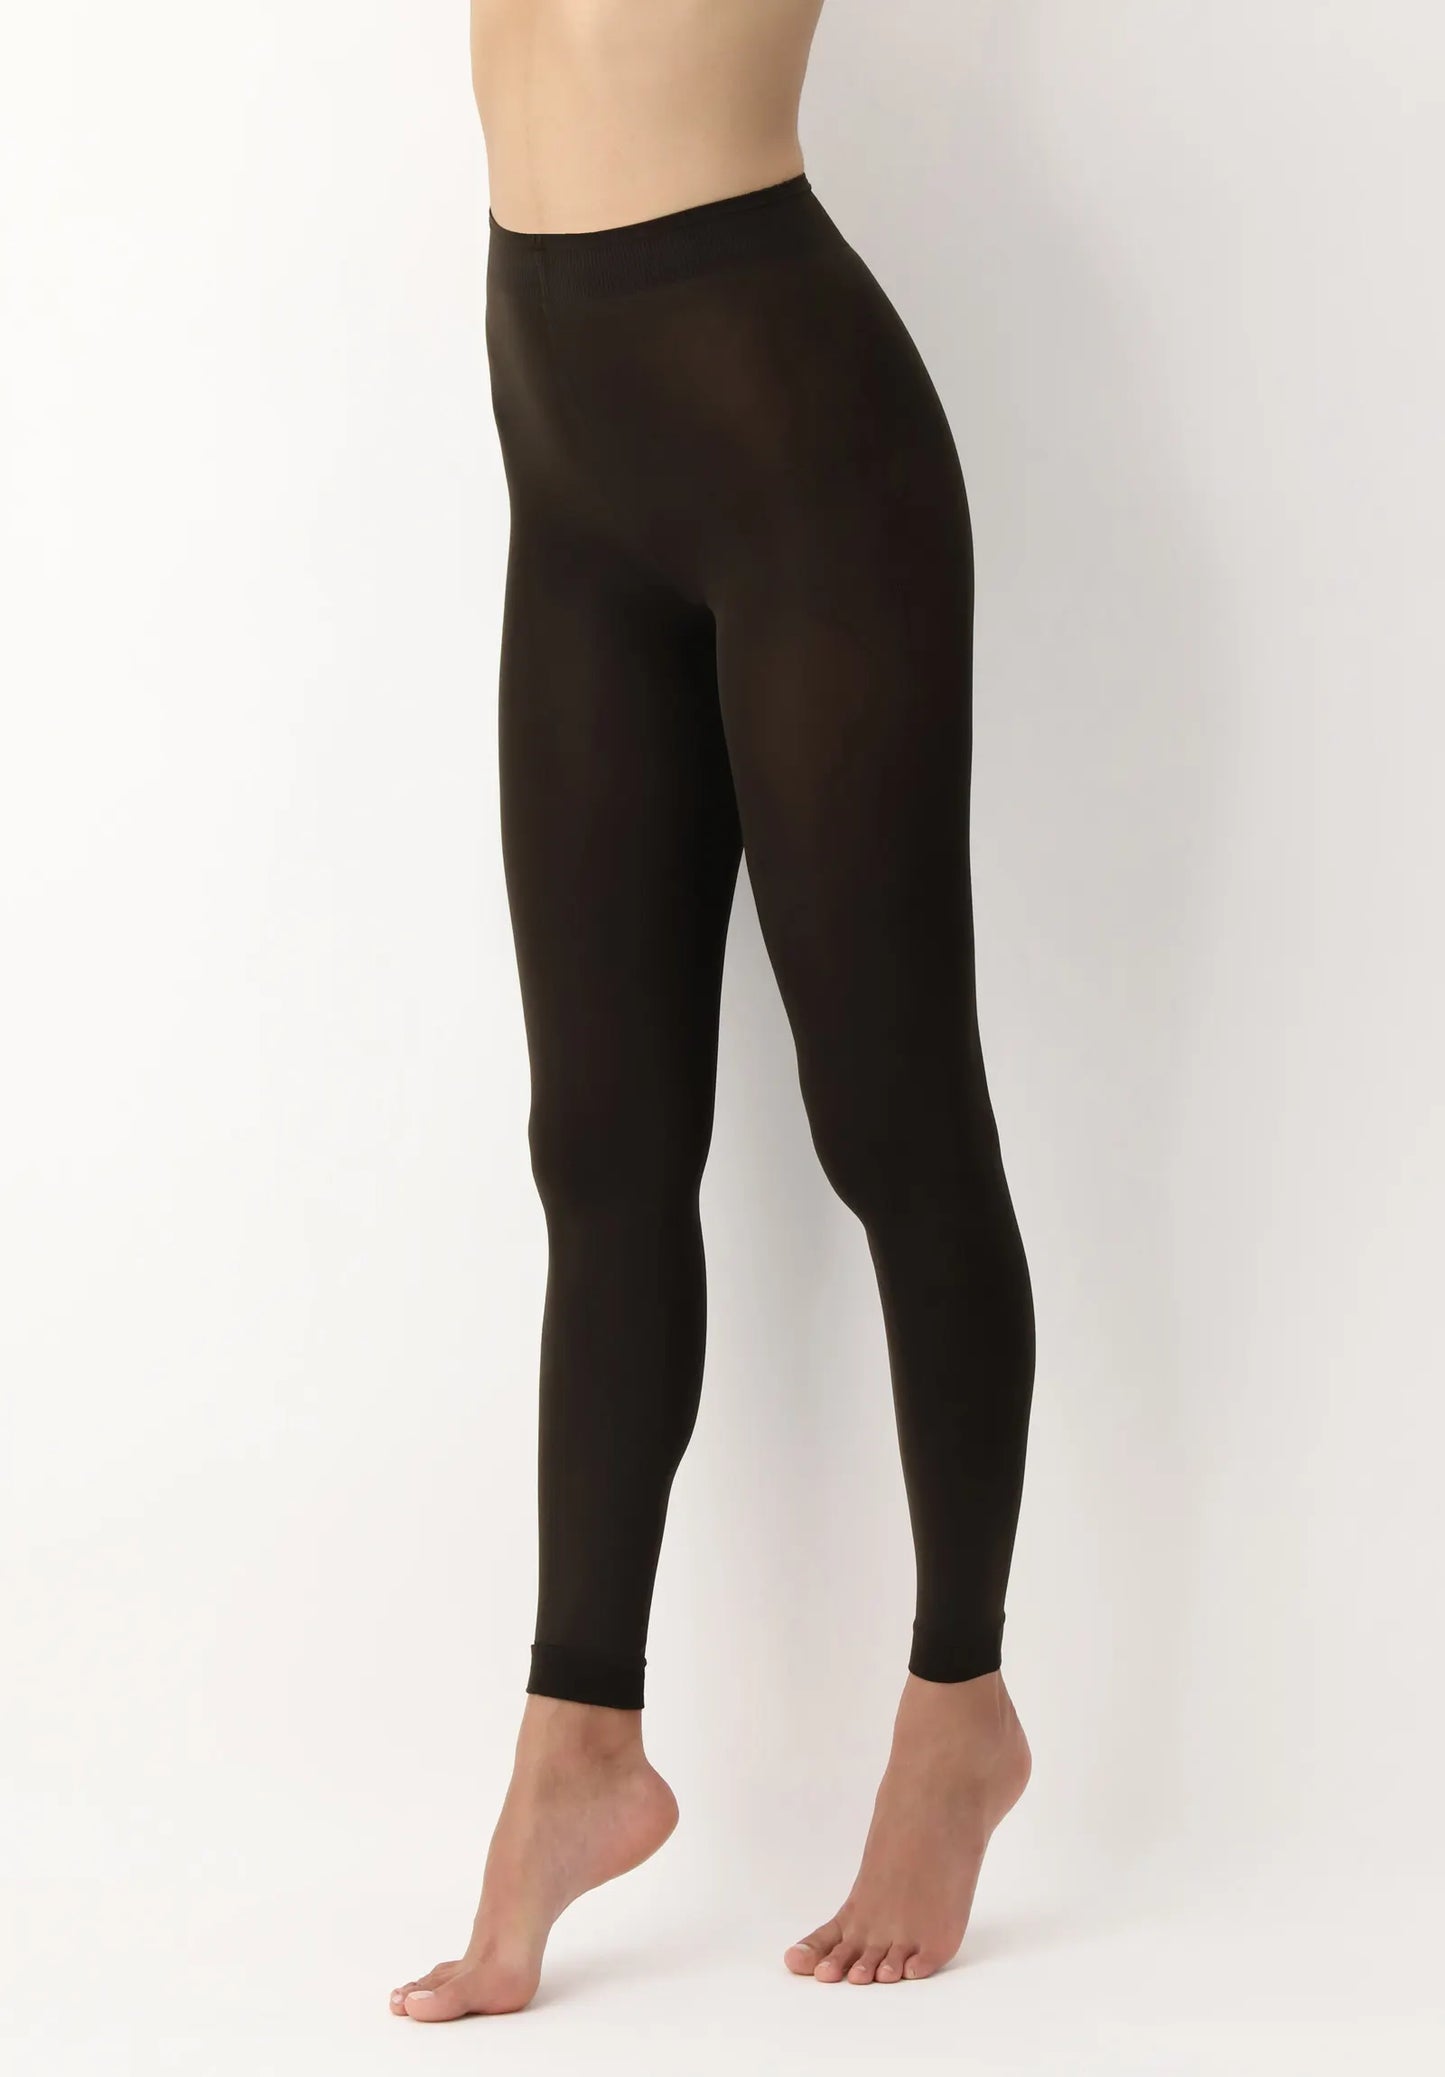 OroblÌ_ All Colors 120 Leggings - Brown ultra opaque soft matte footless tights with flat seams, gusset and deep waist band.